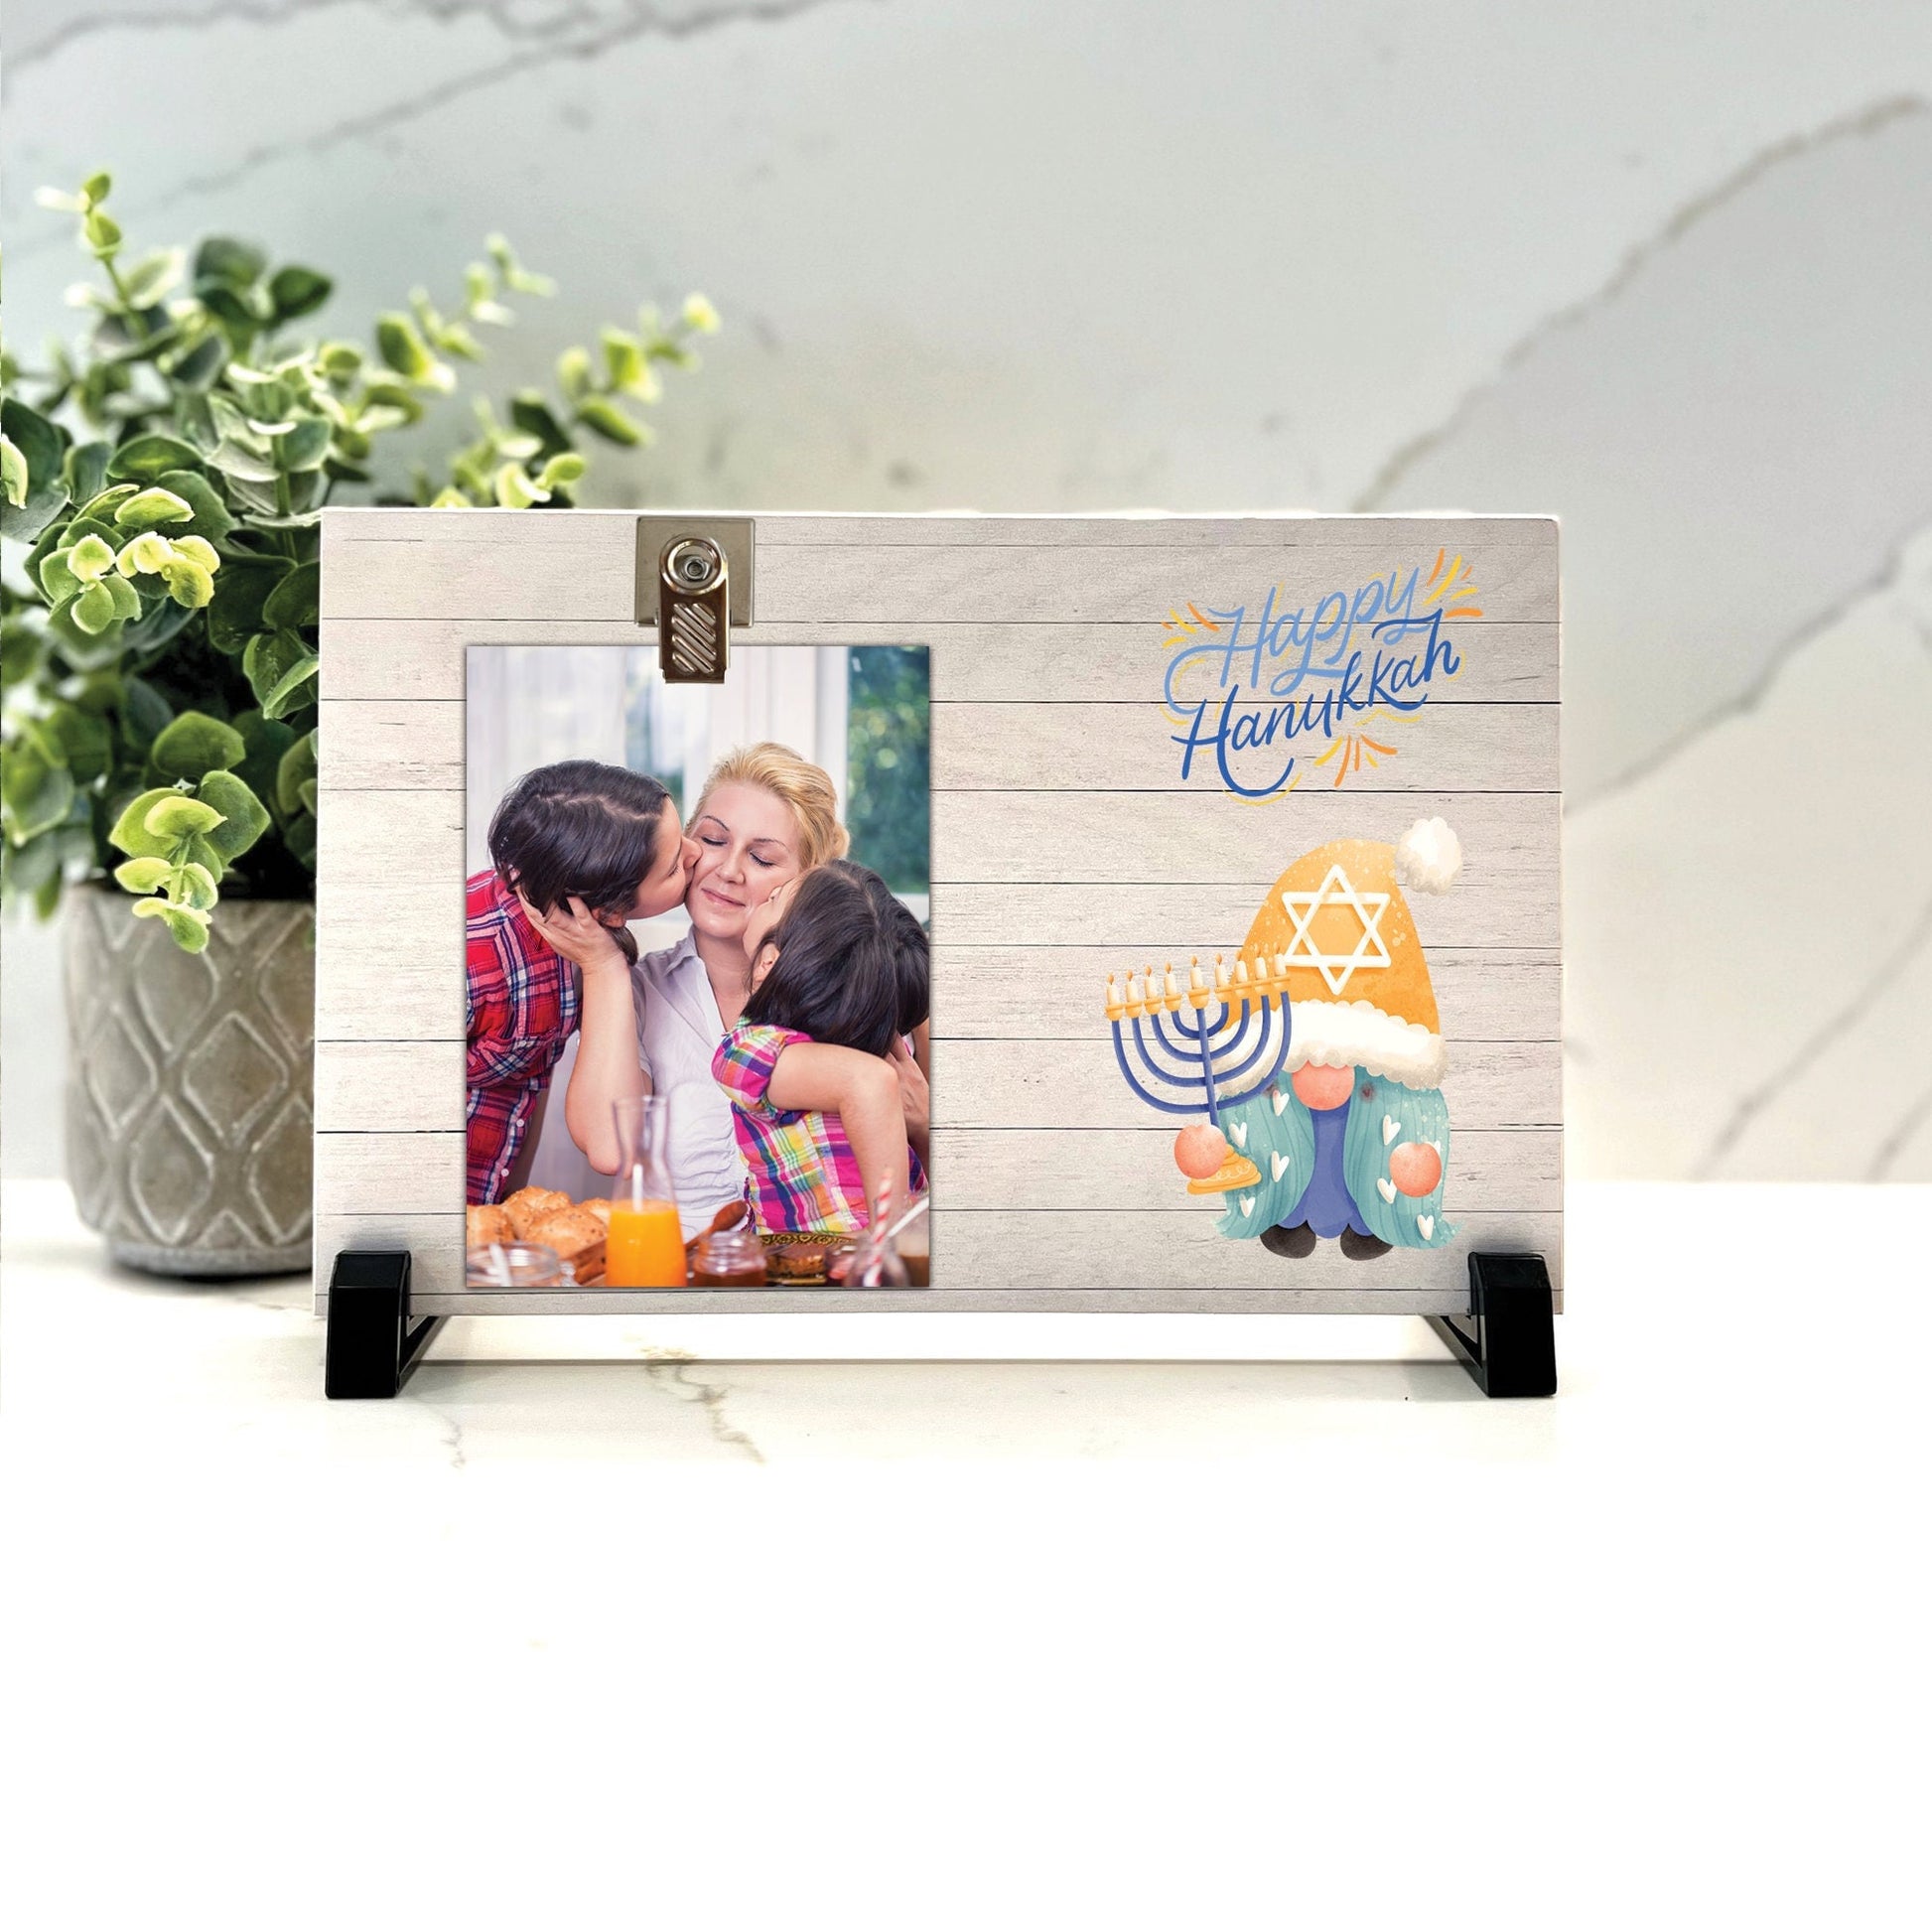 Customize your cherished moments with our Hanukkah Picture Frame available at www.florida-funshine.com. Create a heartfelt gift for family and friends with free personalization, quick shipping in 1-2 business days, and quality crafted picture frames, portraits, and plaques made in the USA."